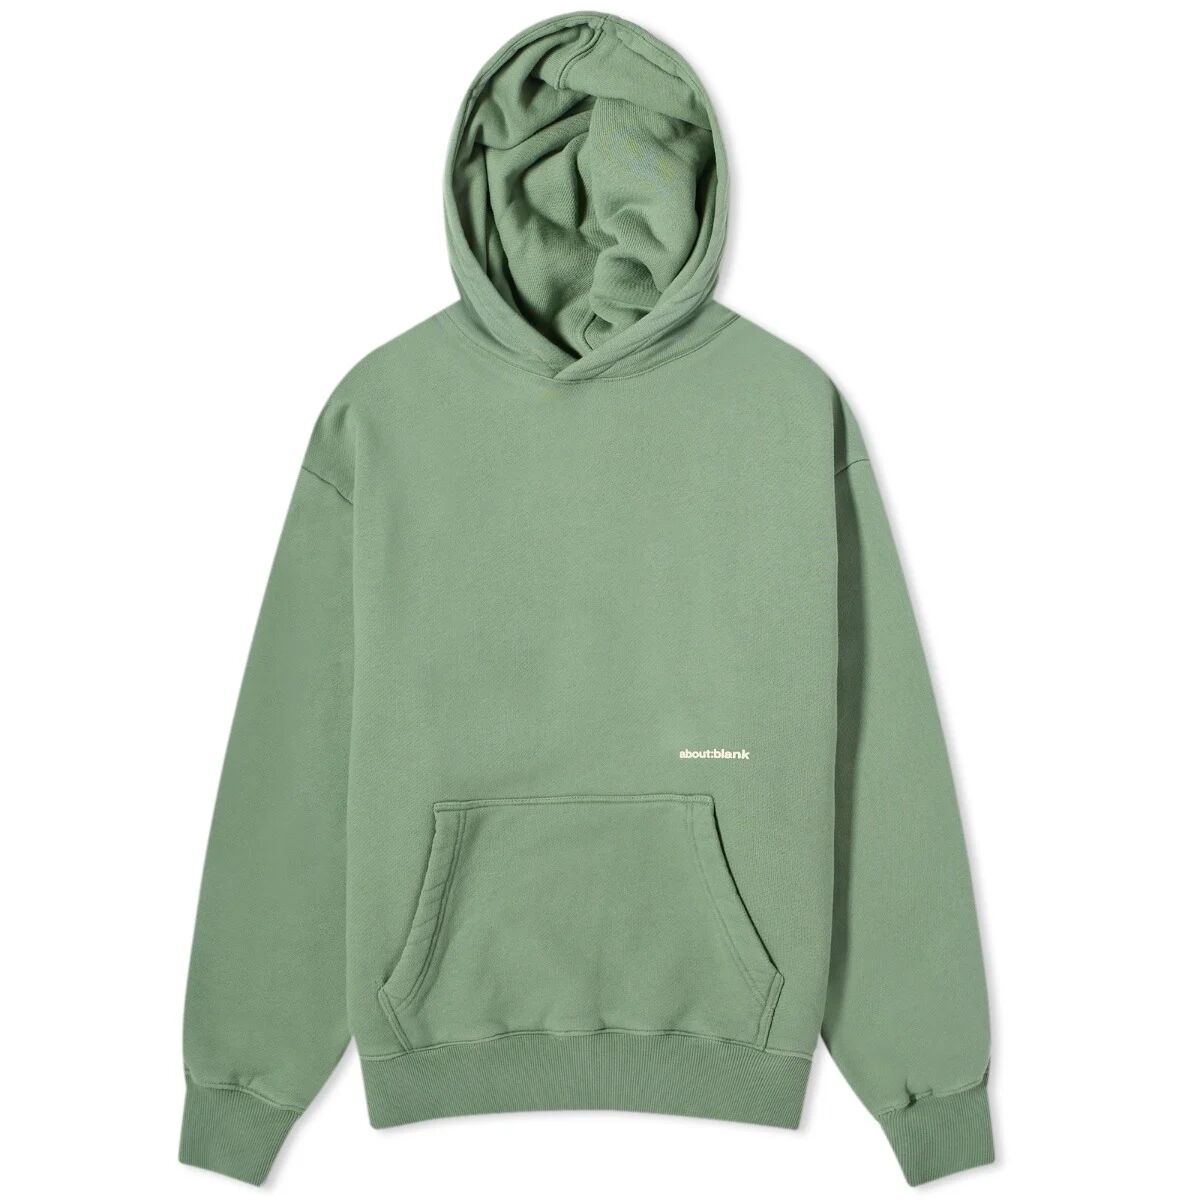 about:blank Men's Box Logo Hoodie in Sage/Ecru, Size Small